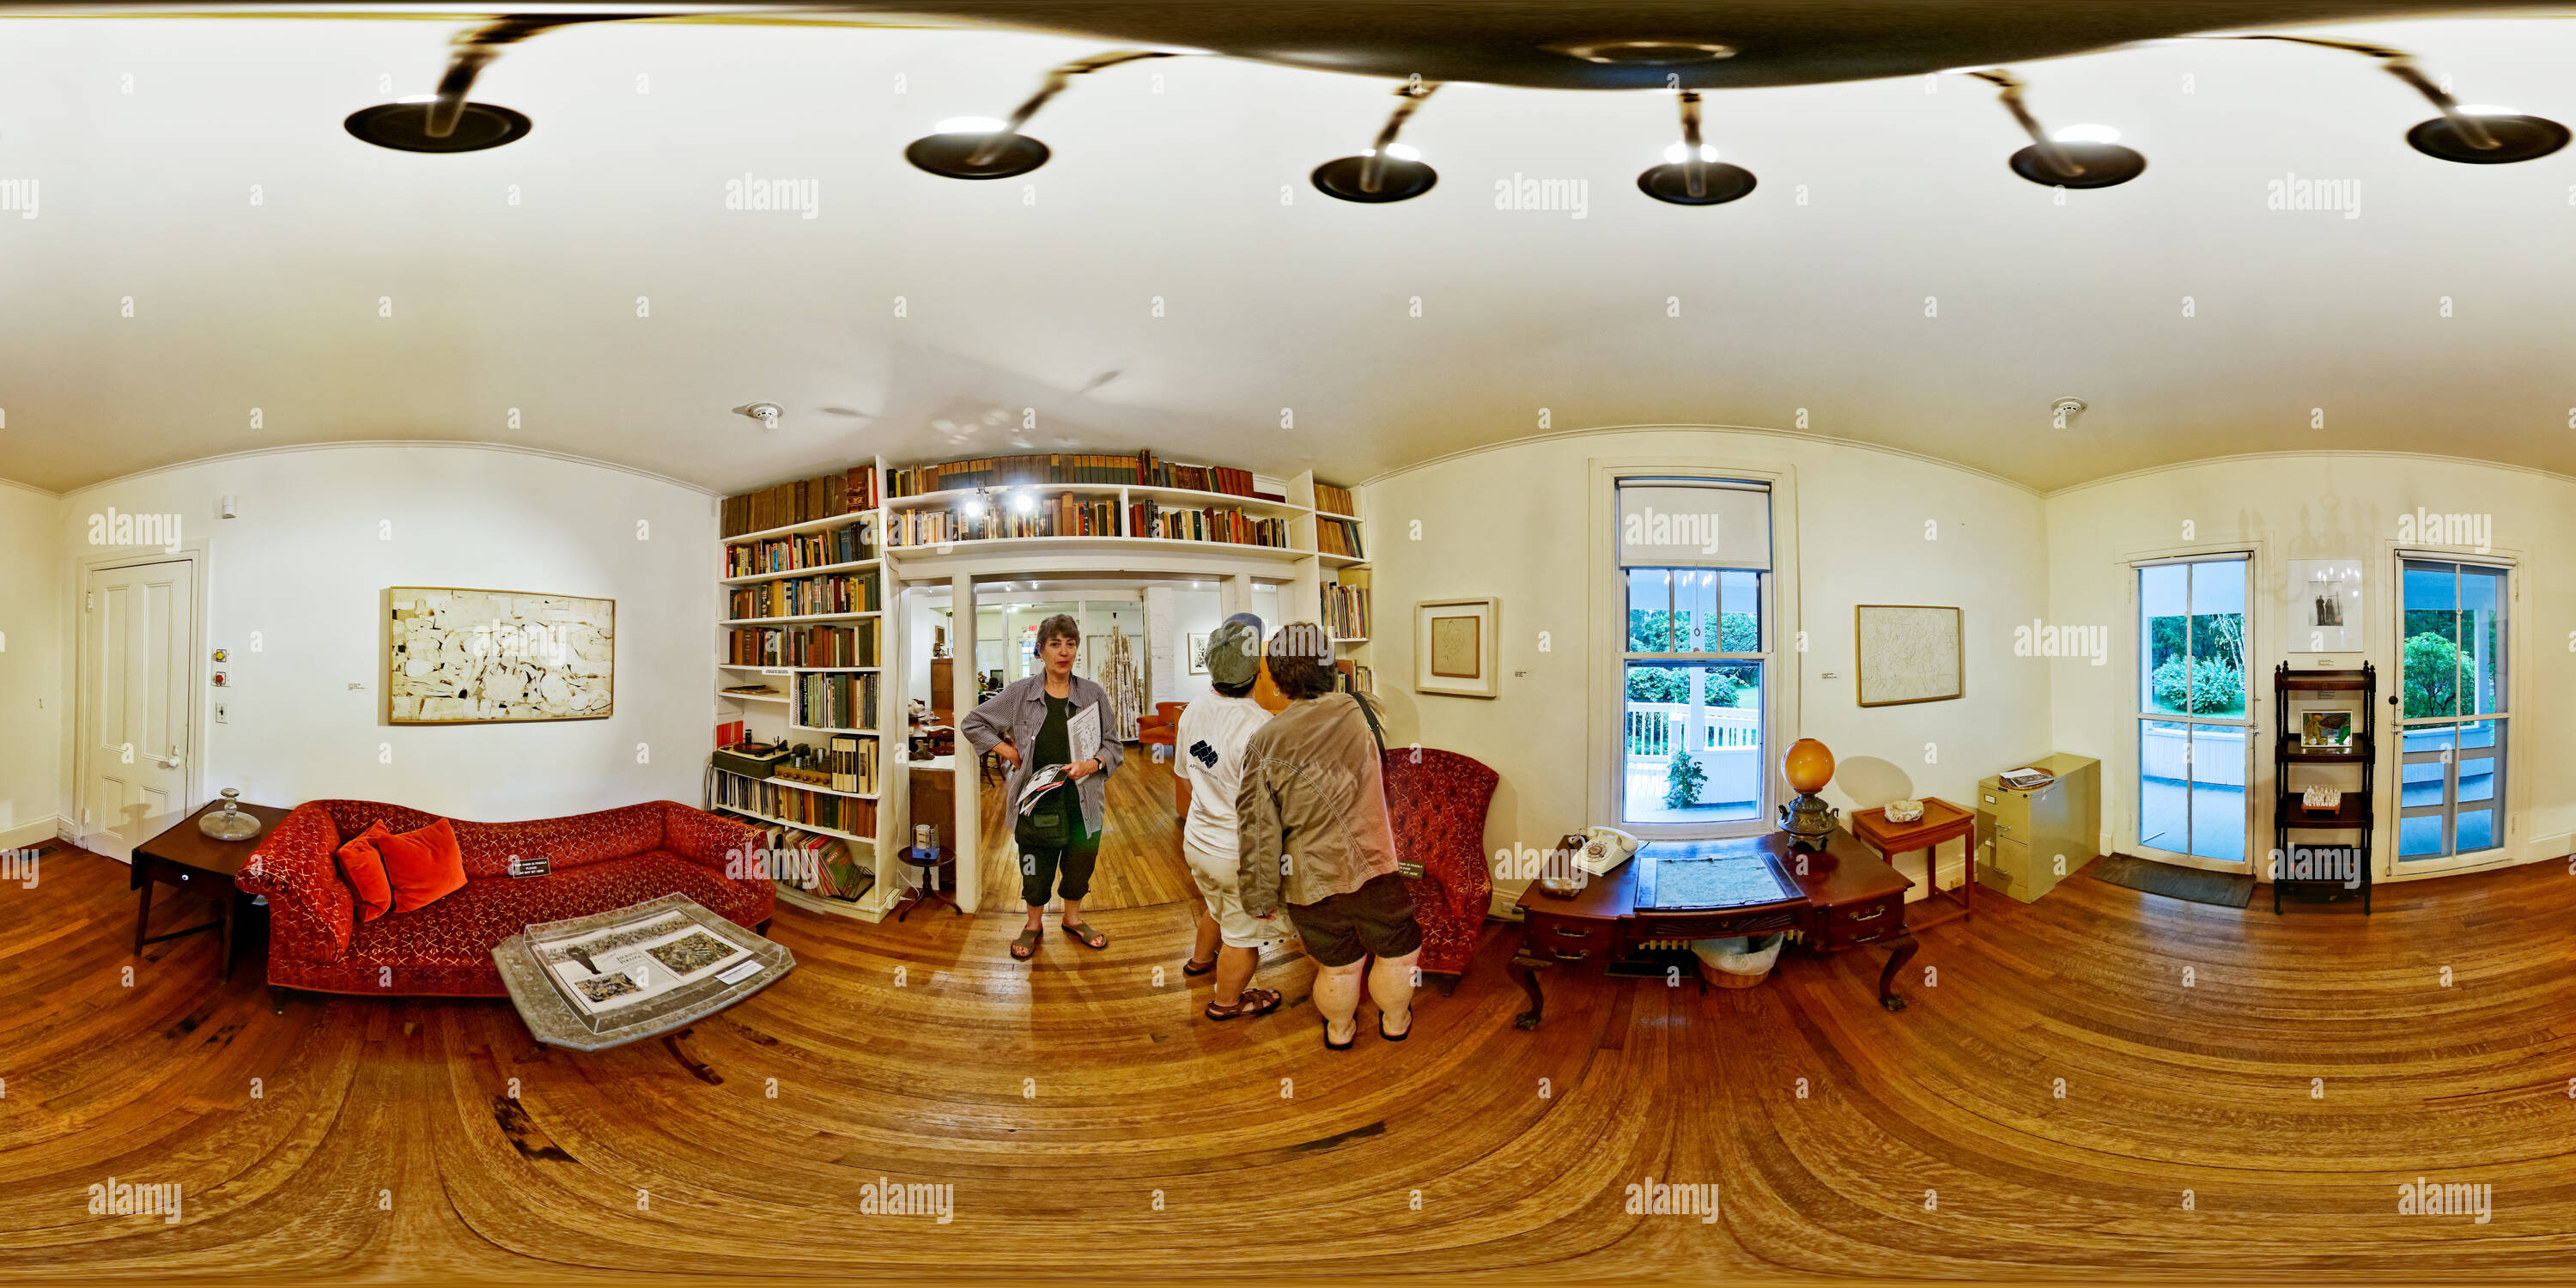 360 degree panoramic view of Sitting Room, Pollack Krasner House, Long Island, NY